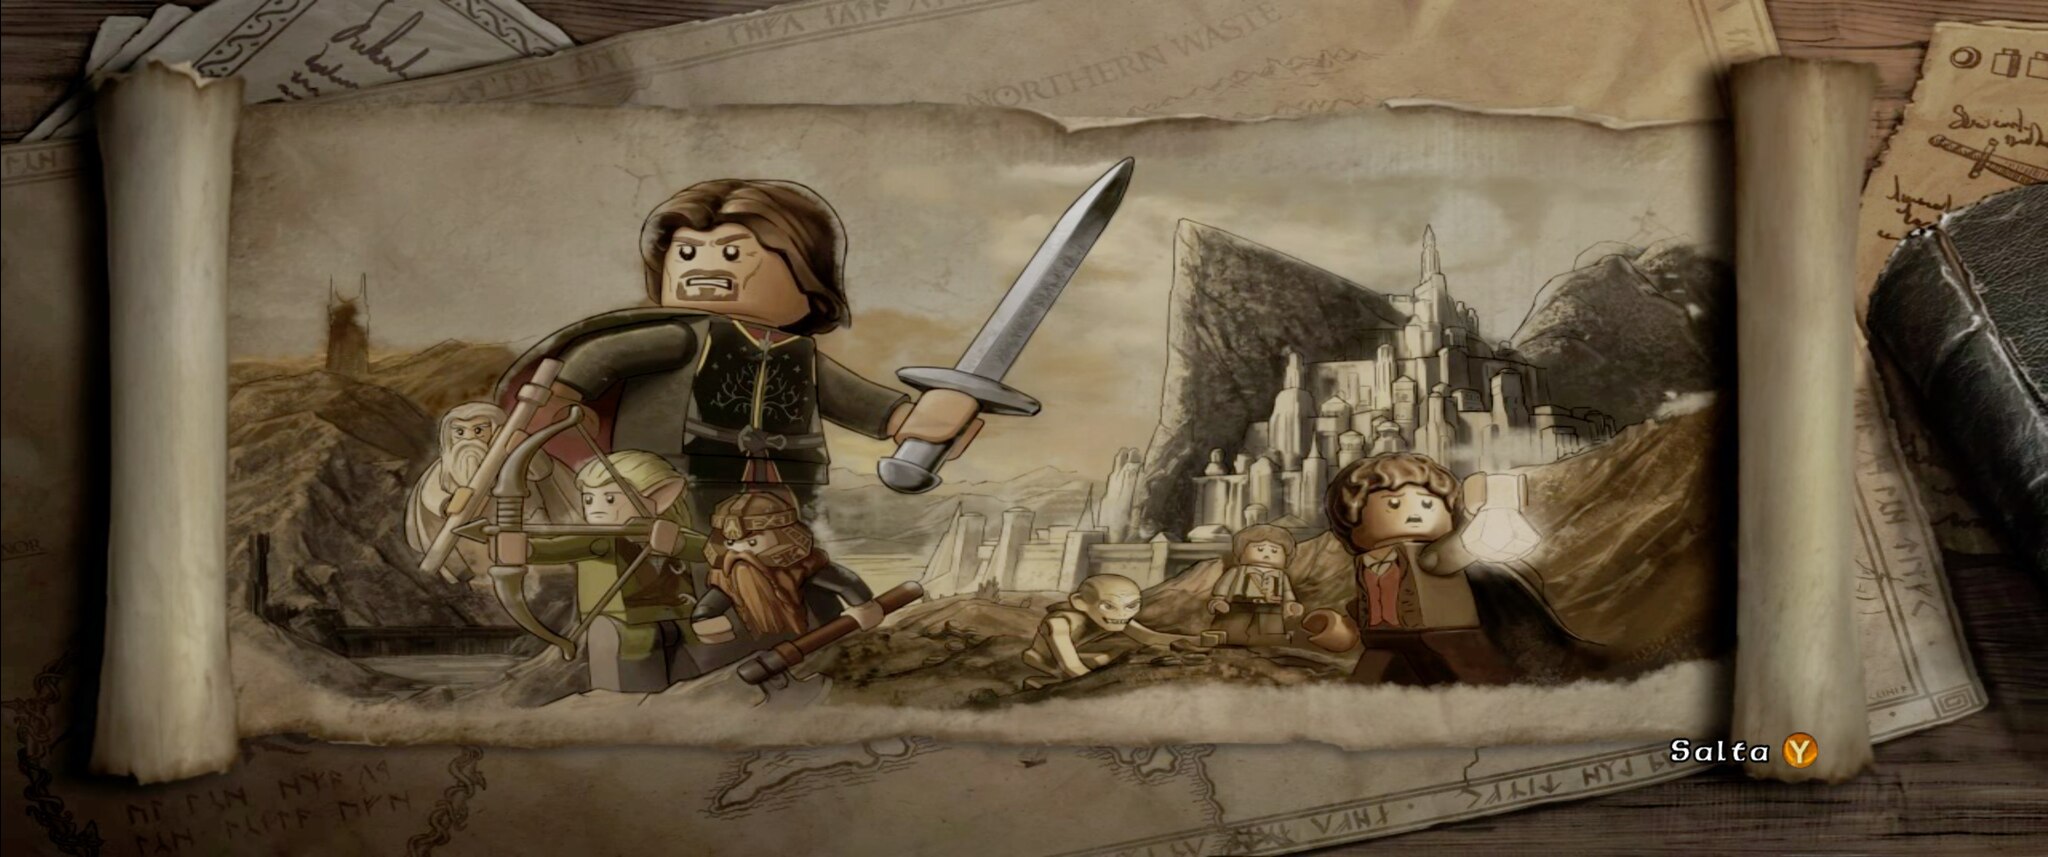 lego lord of the rings character unlock codes